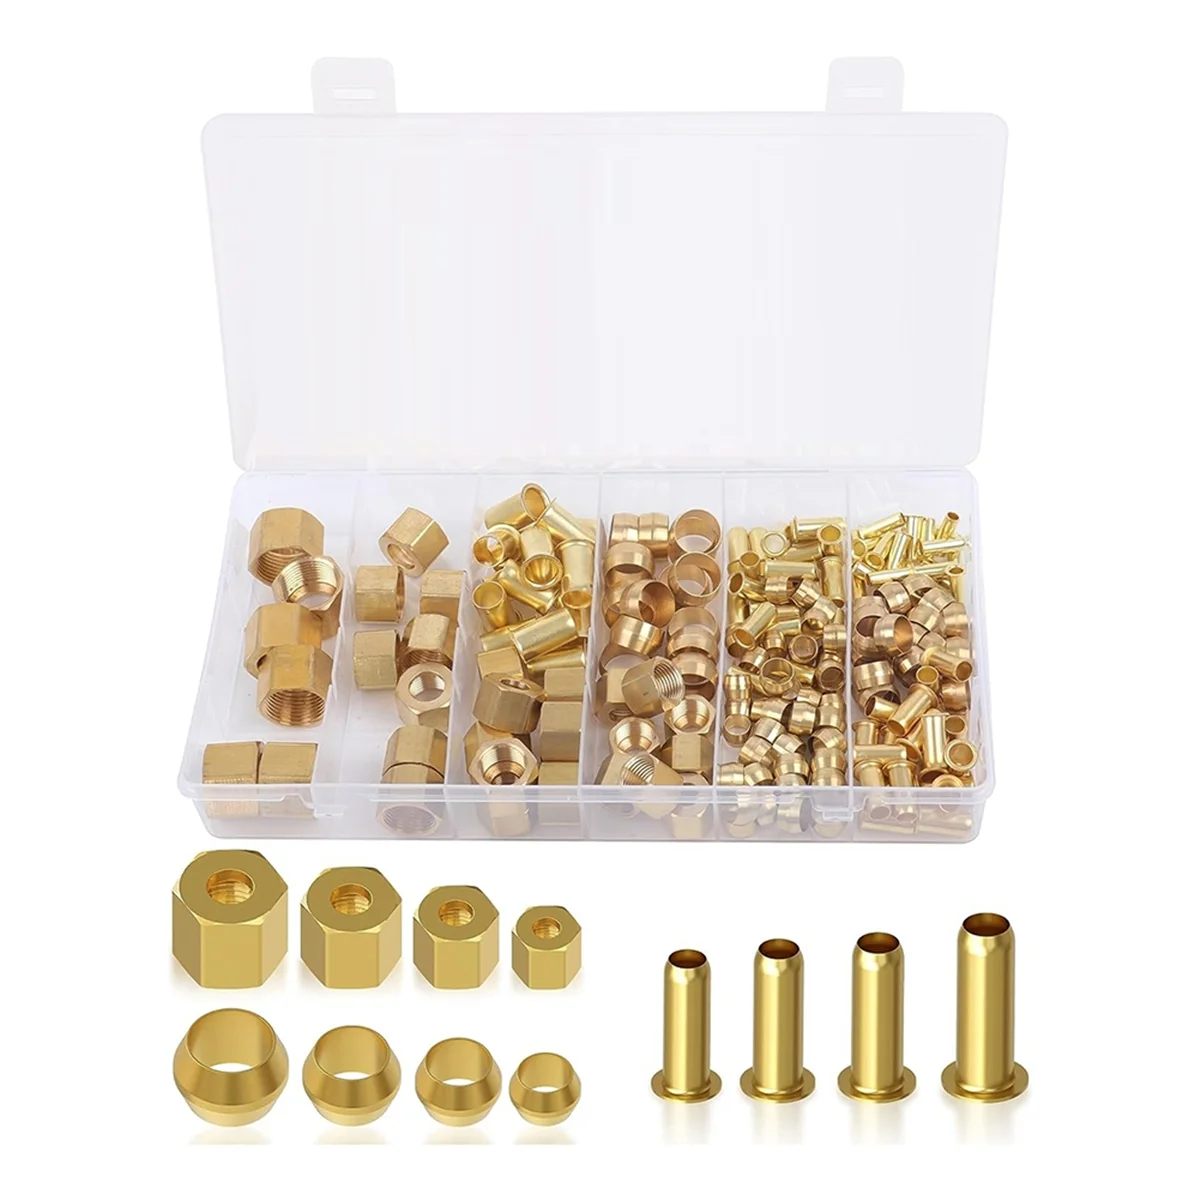 

180PCS Compression Fittings Assortment Kit-(1/4In, 3/8In, 5/16In, 1/2In) of Brass Compression Sleeve Ferrule,Insert&Nuts